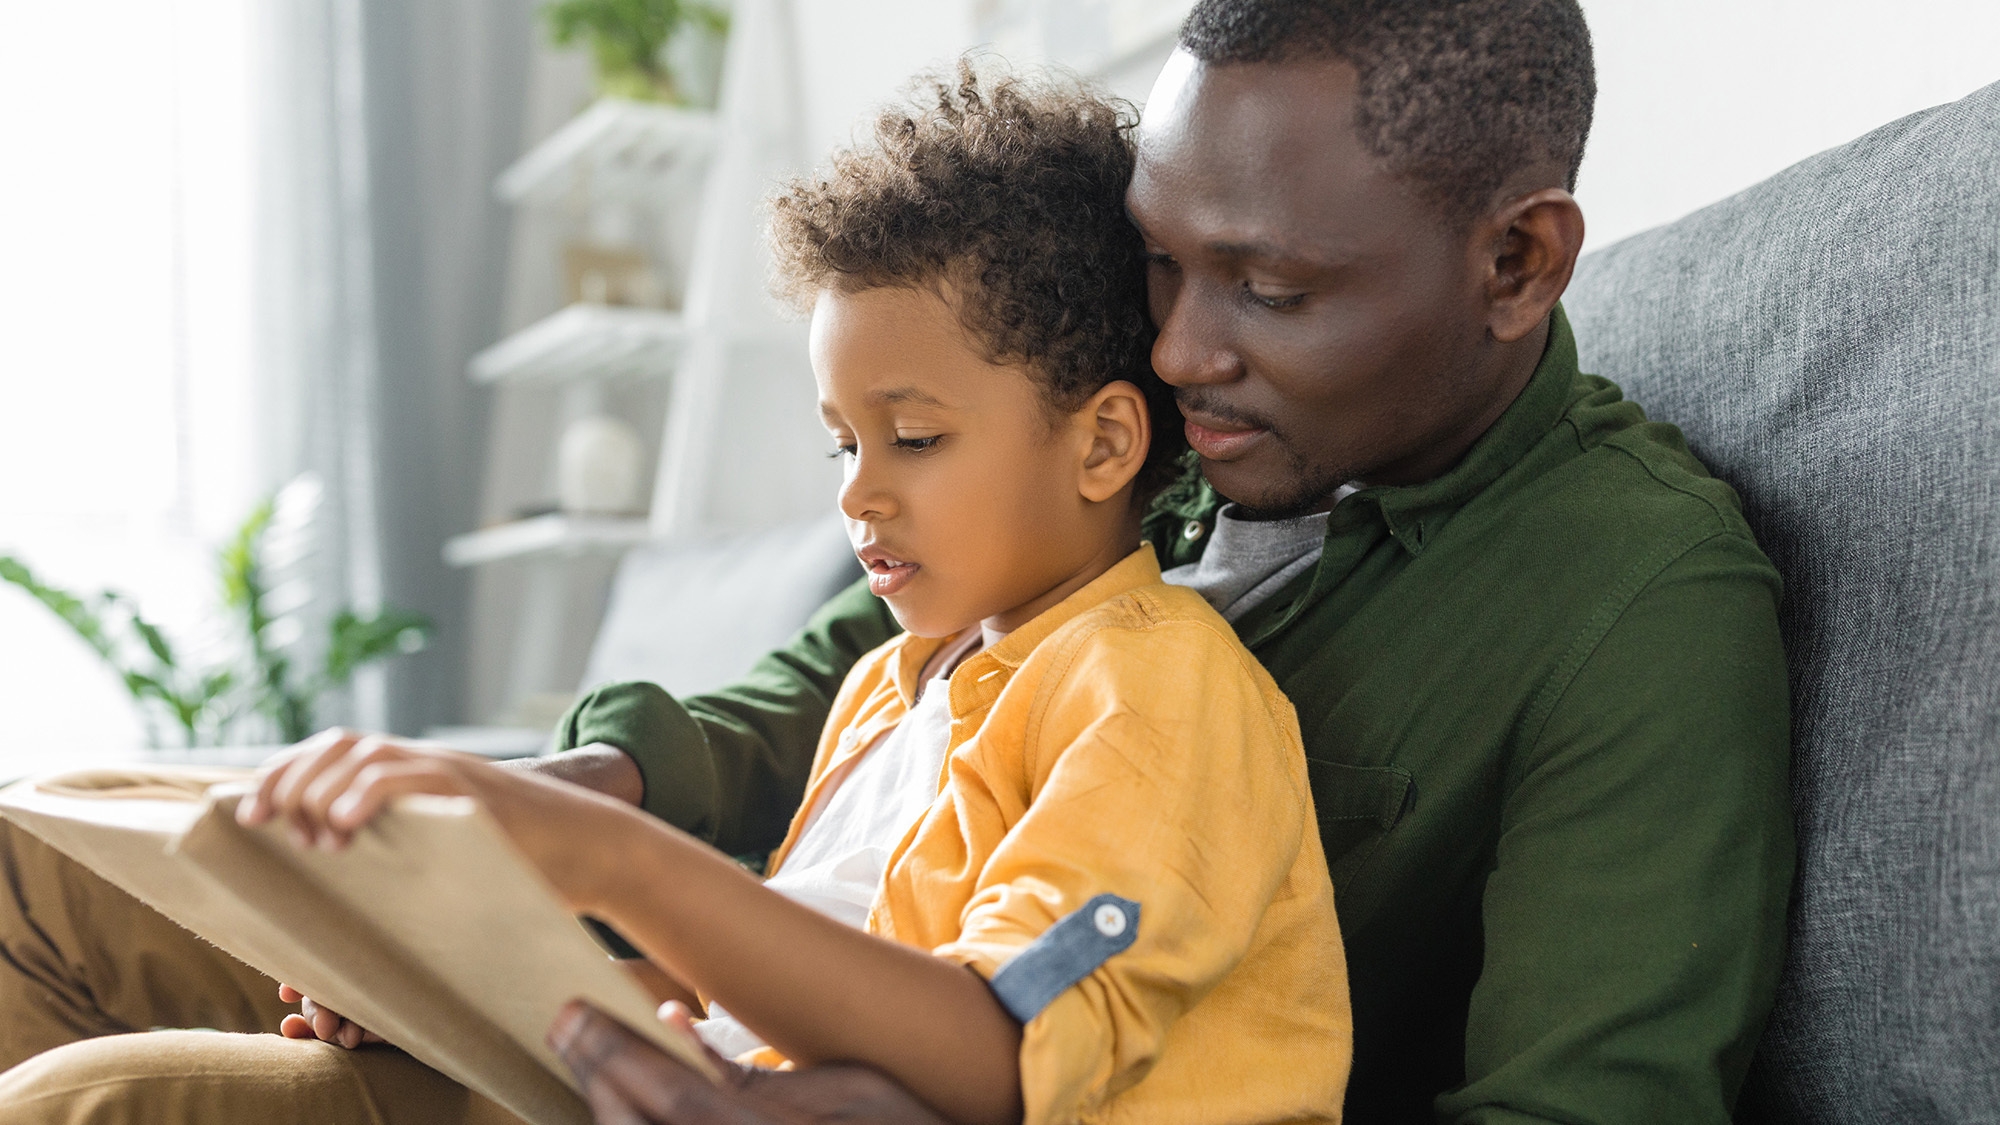 An image of a father and son sitting on a couch together. They are holding a book and the child is reading to his father.